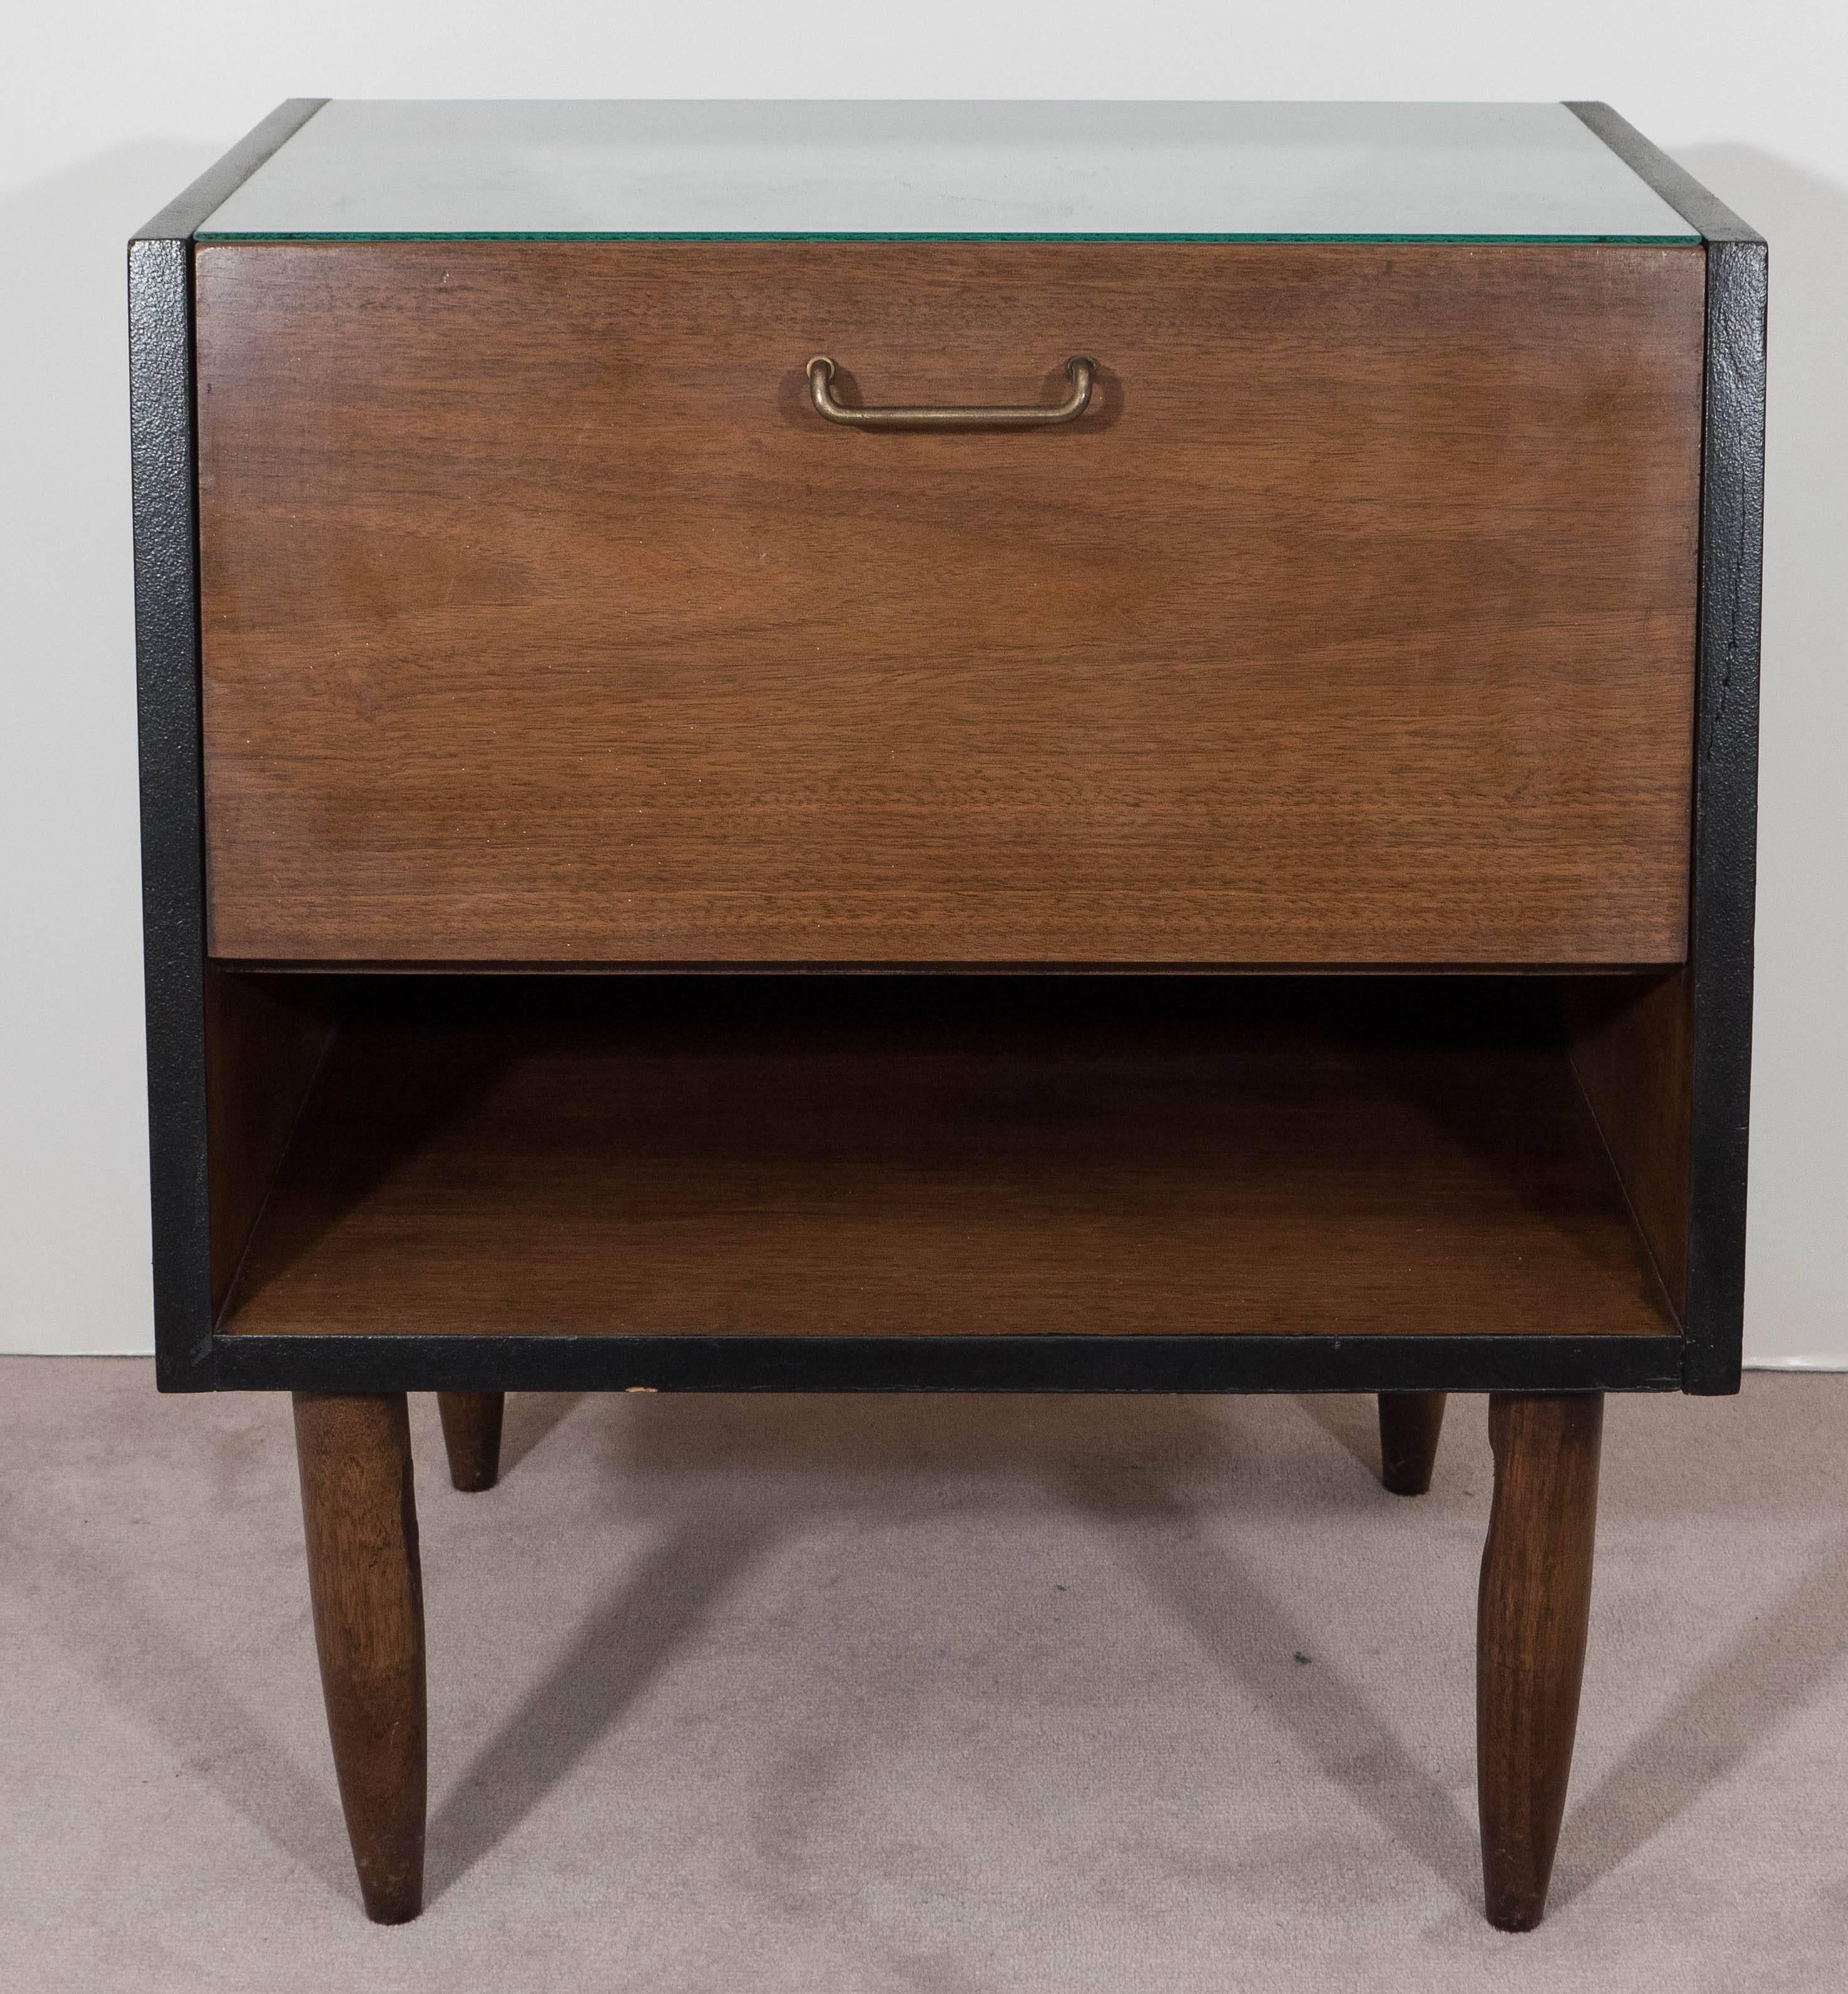 This vintage pair of wooden nightstands, designed by Merton Gershun for the American of Martinsville 'Dania Collection', produced circa 1950s-1960s, comes with laminated sides and top, standing on tapered legs. Included are drop front doors and